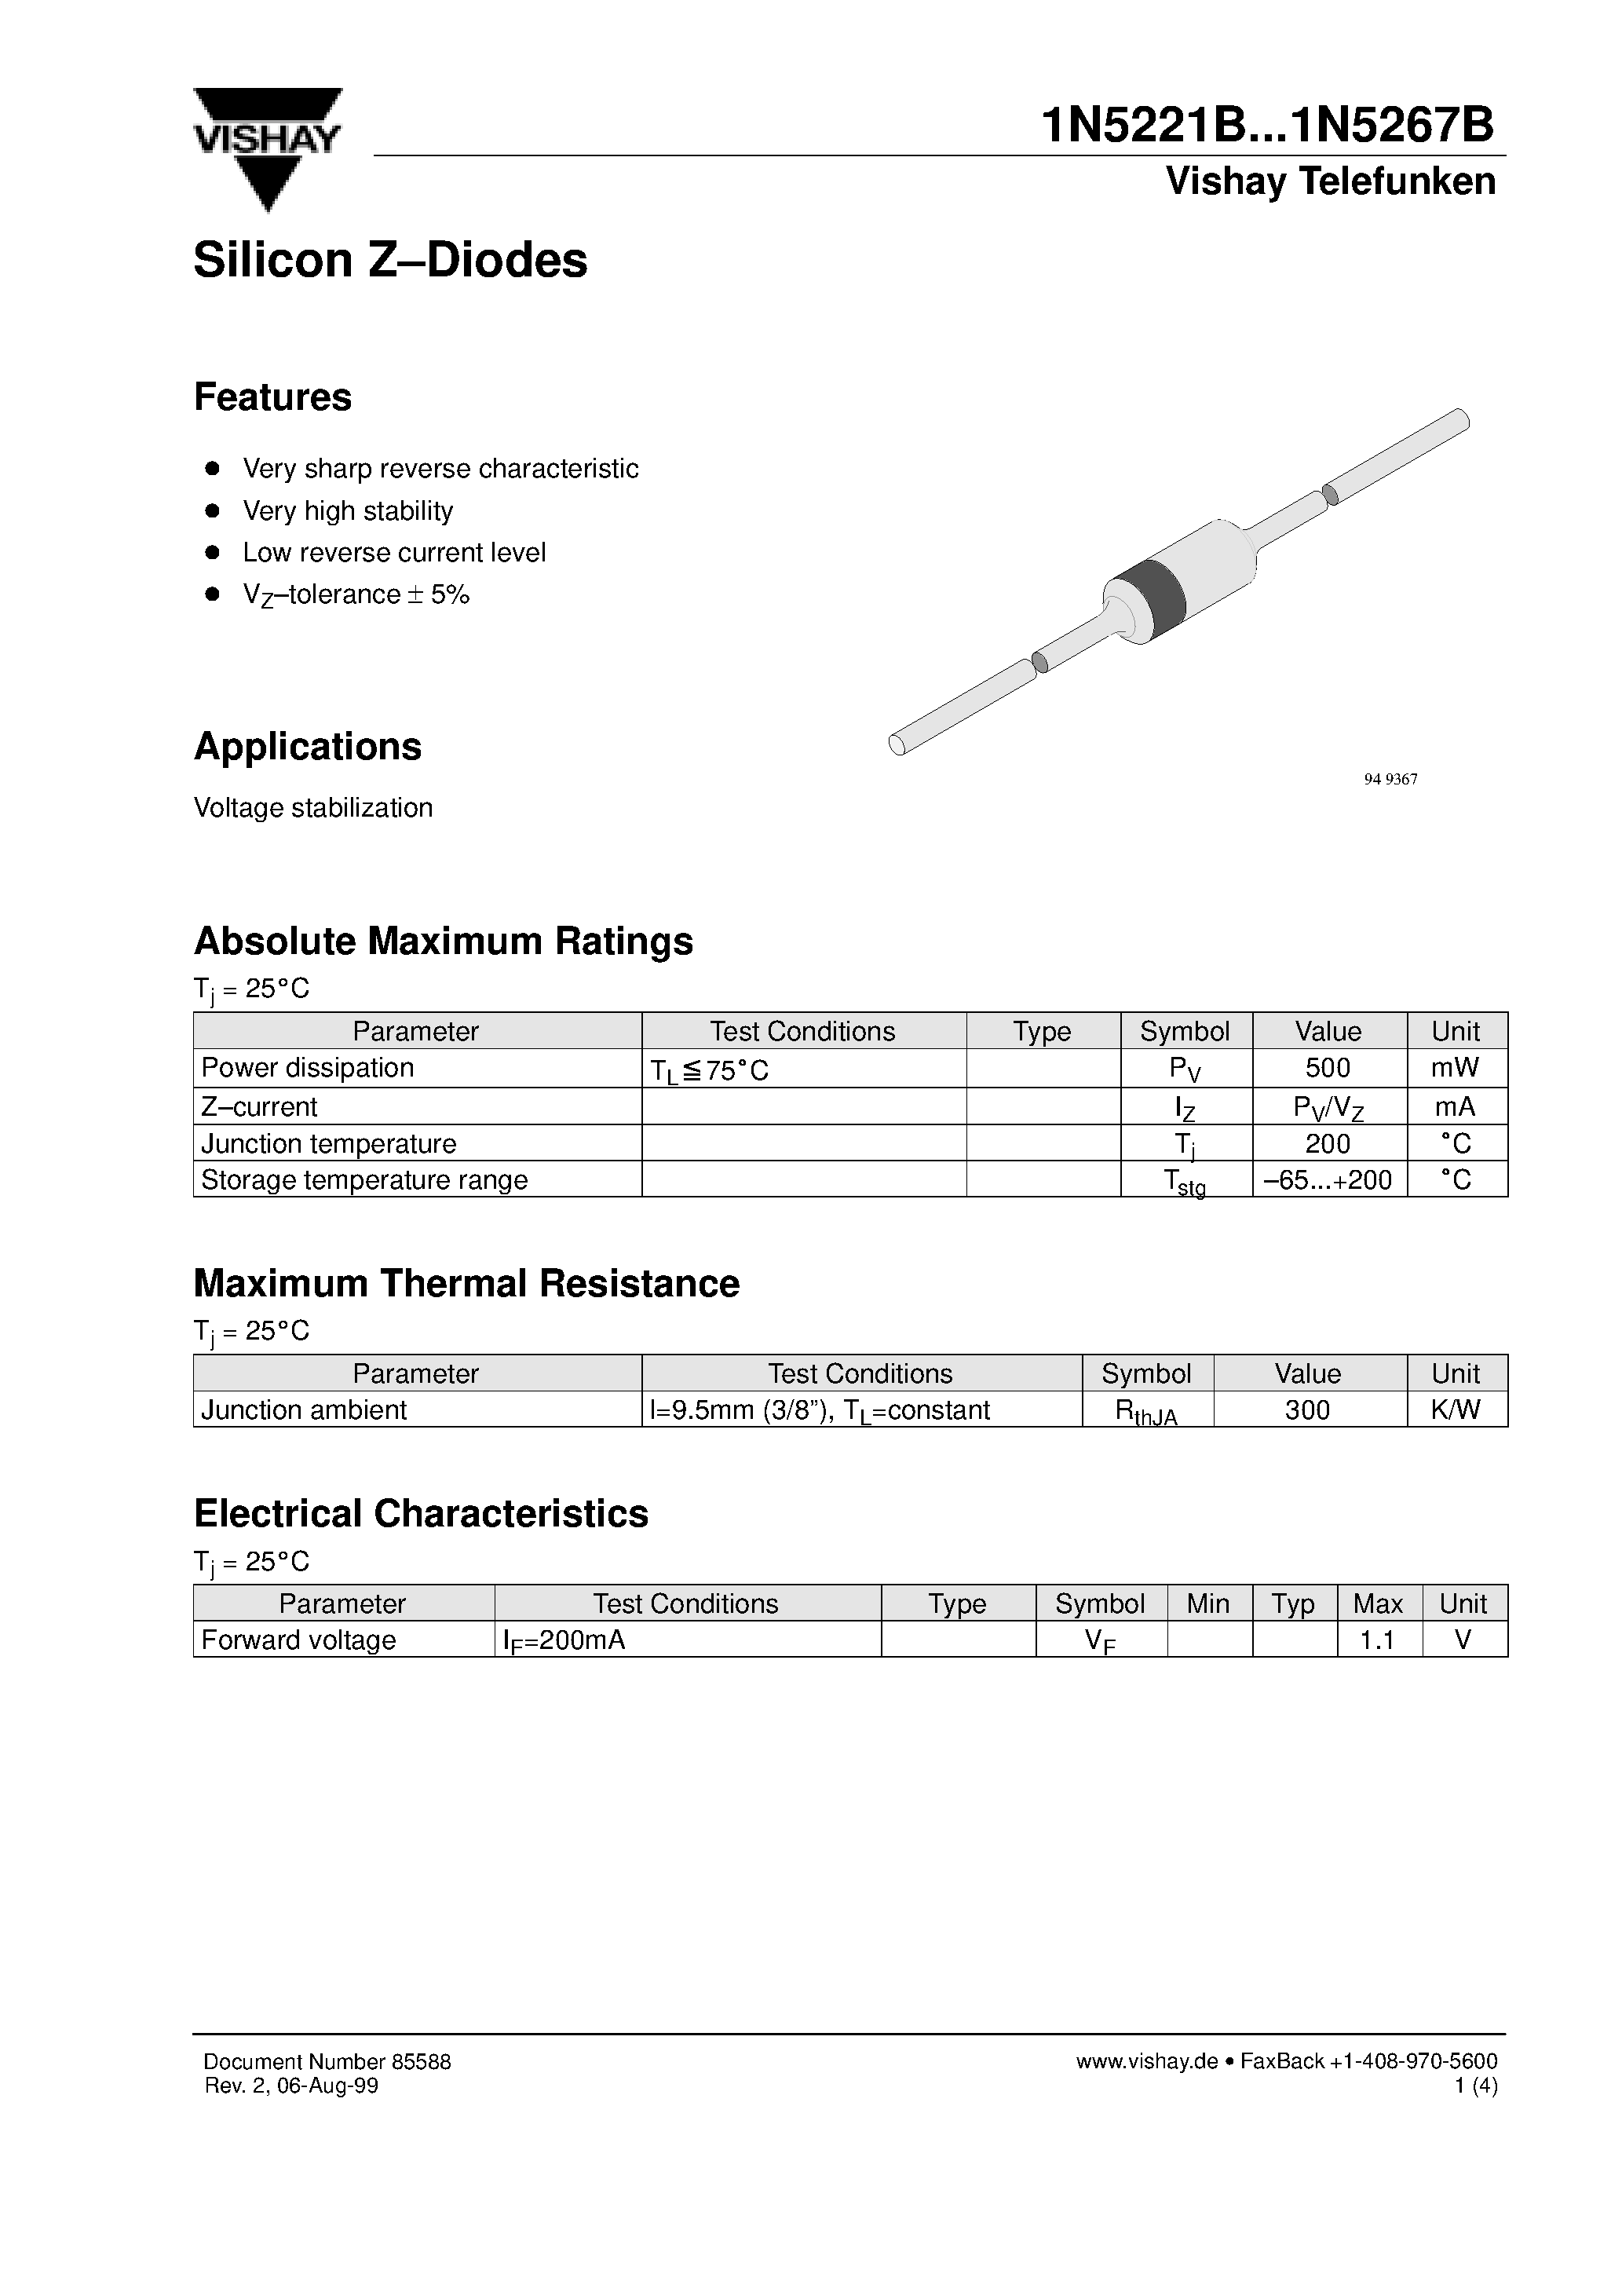 Datasheet 1N5251B - Silicon Z-Diodes page 1